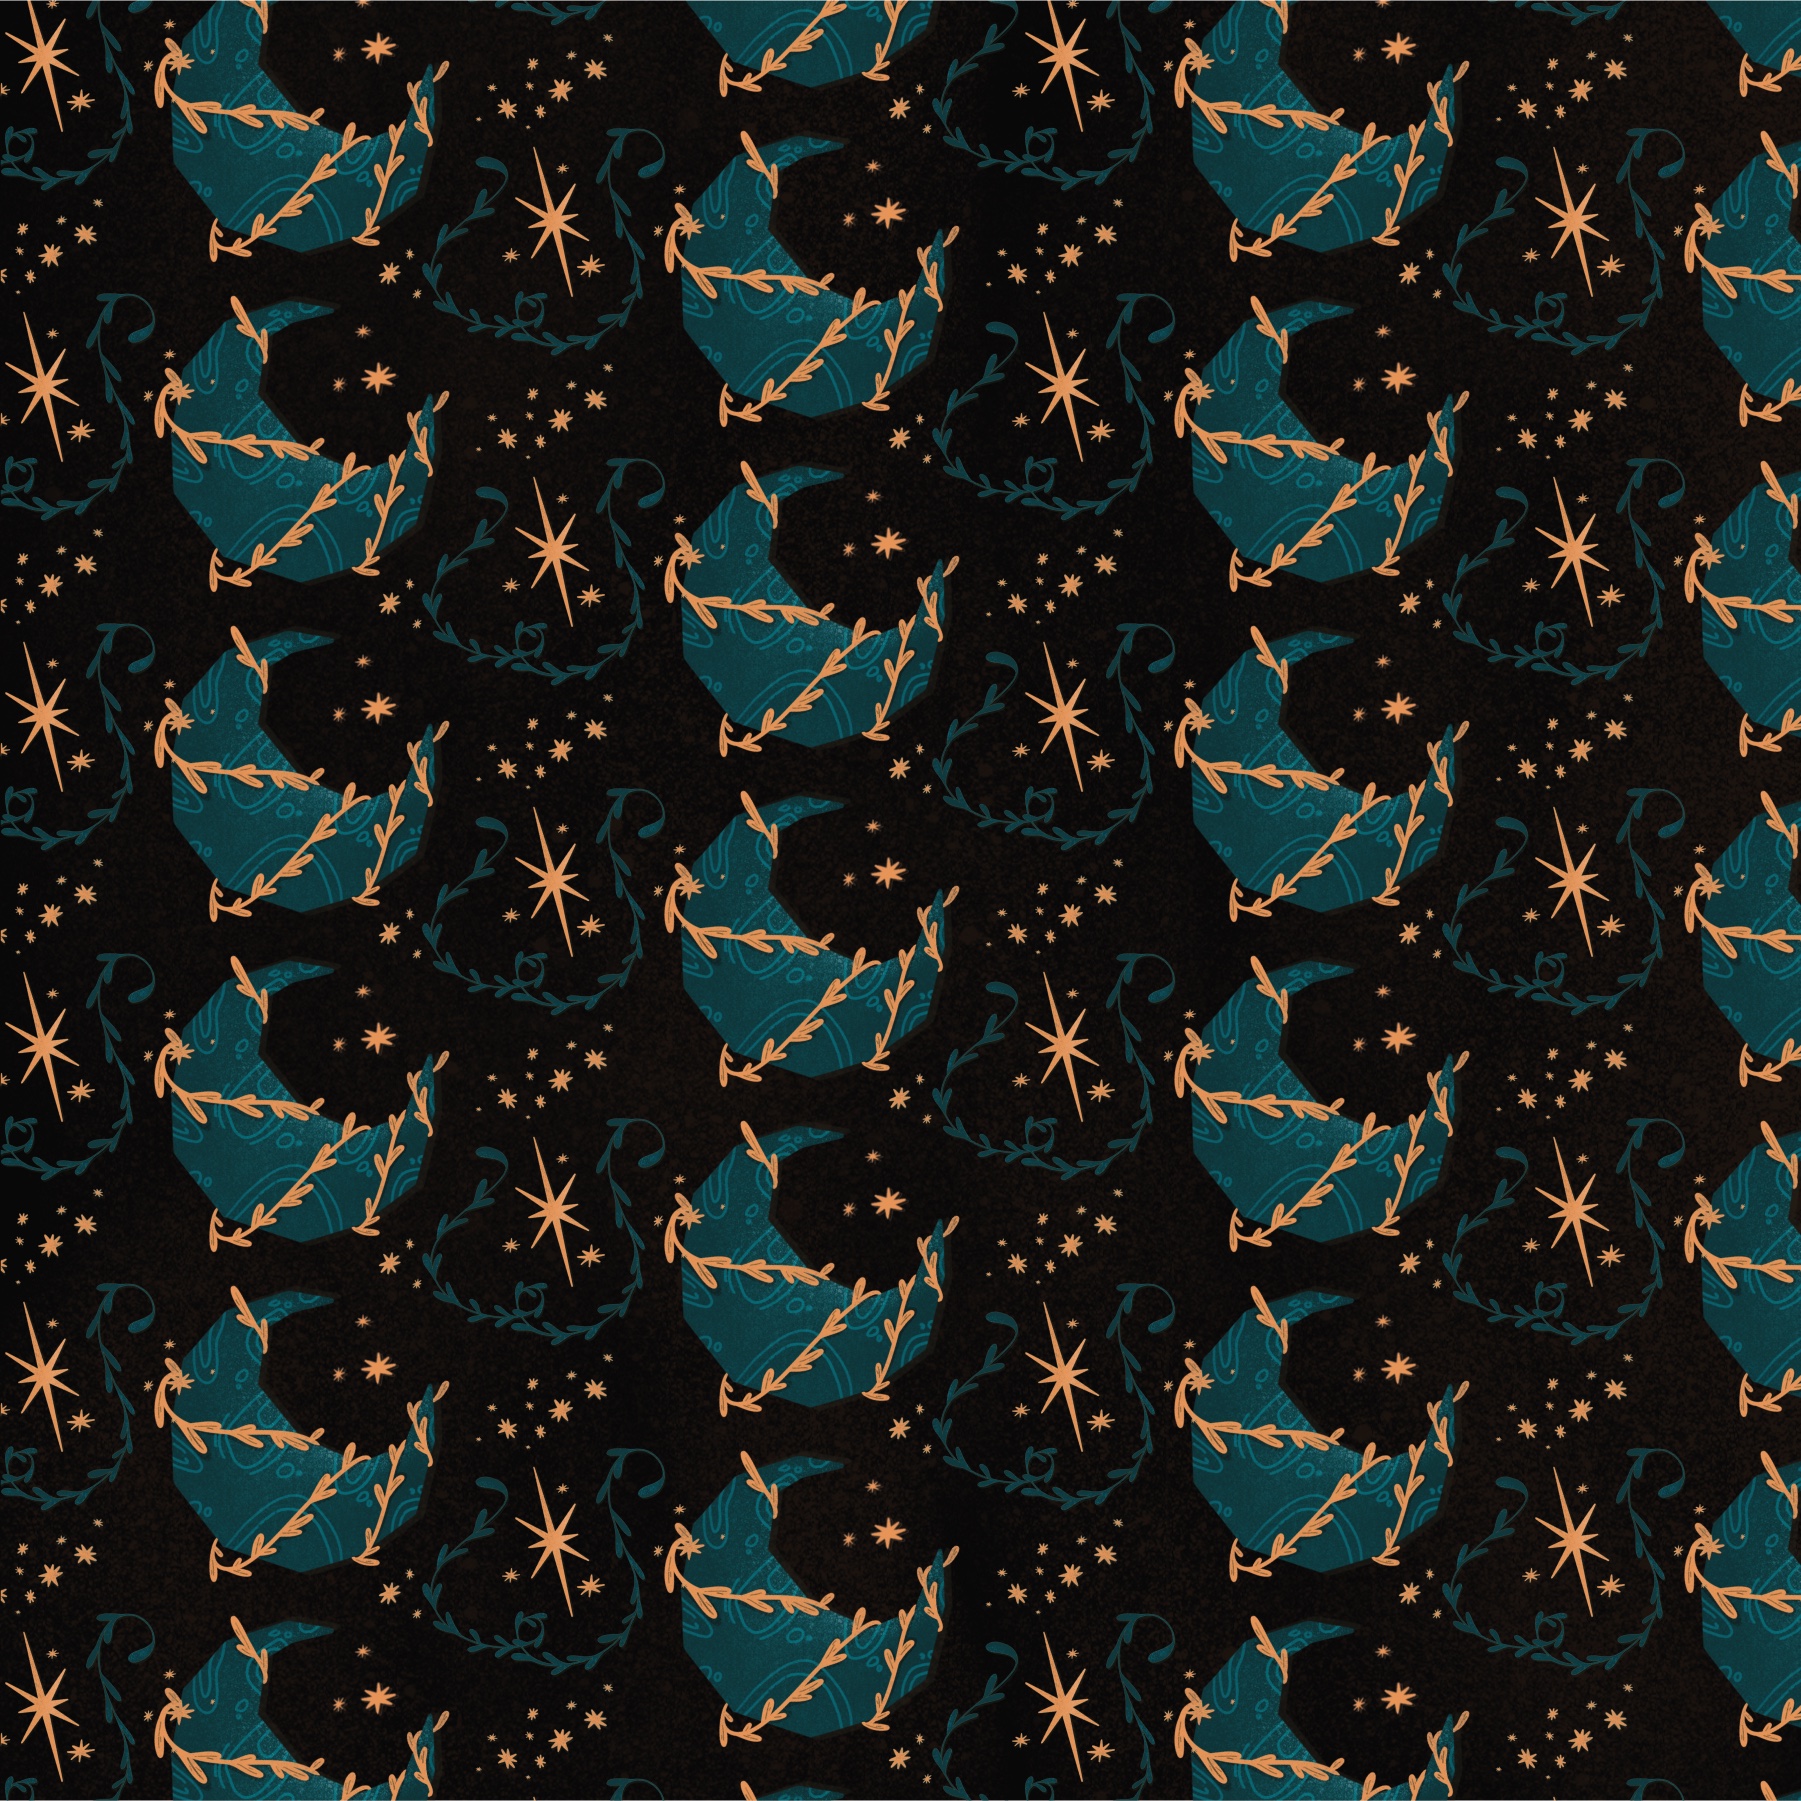 Moon Pattern in black, gold and blue colors